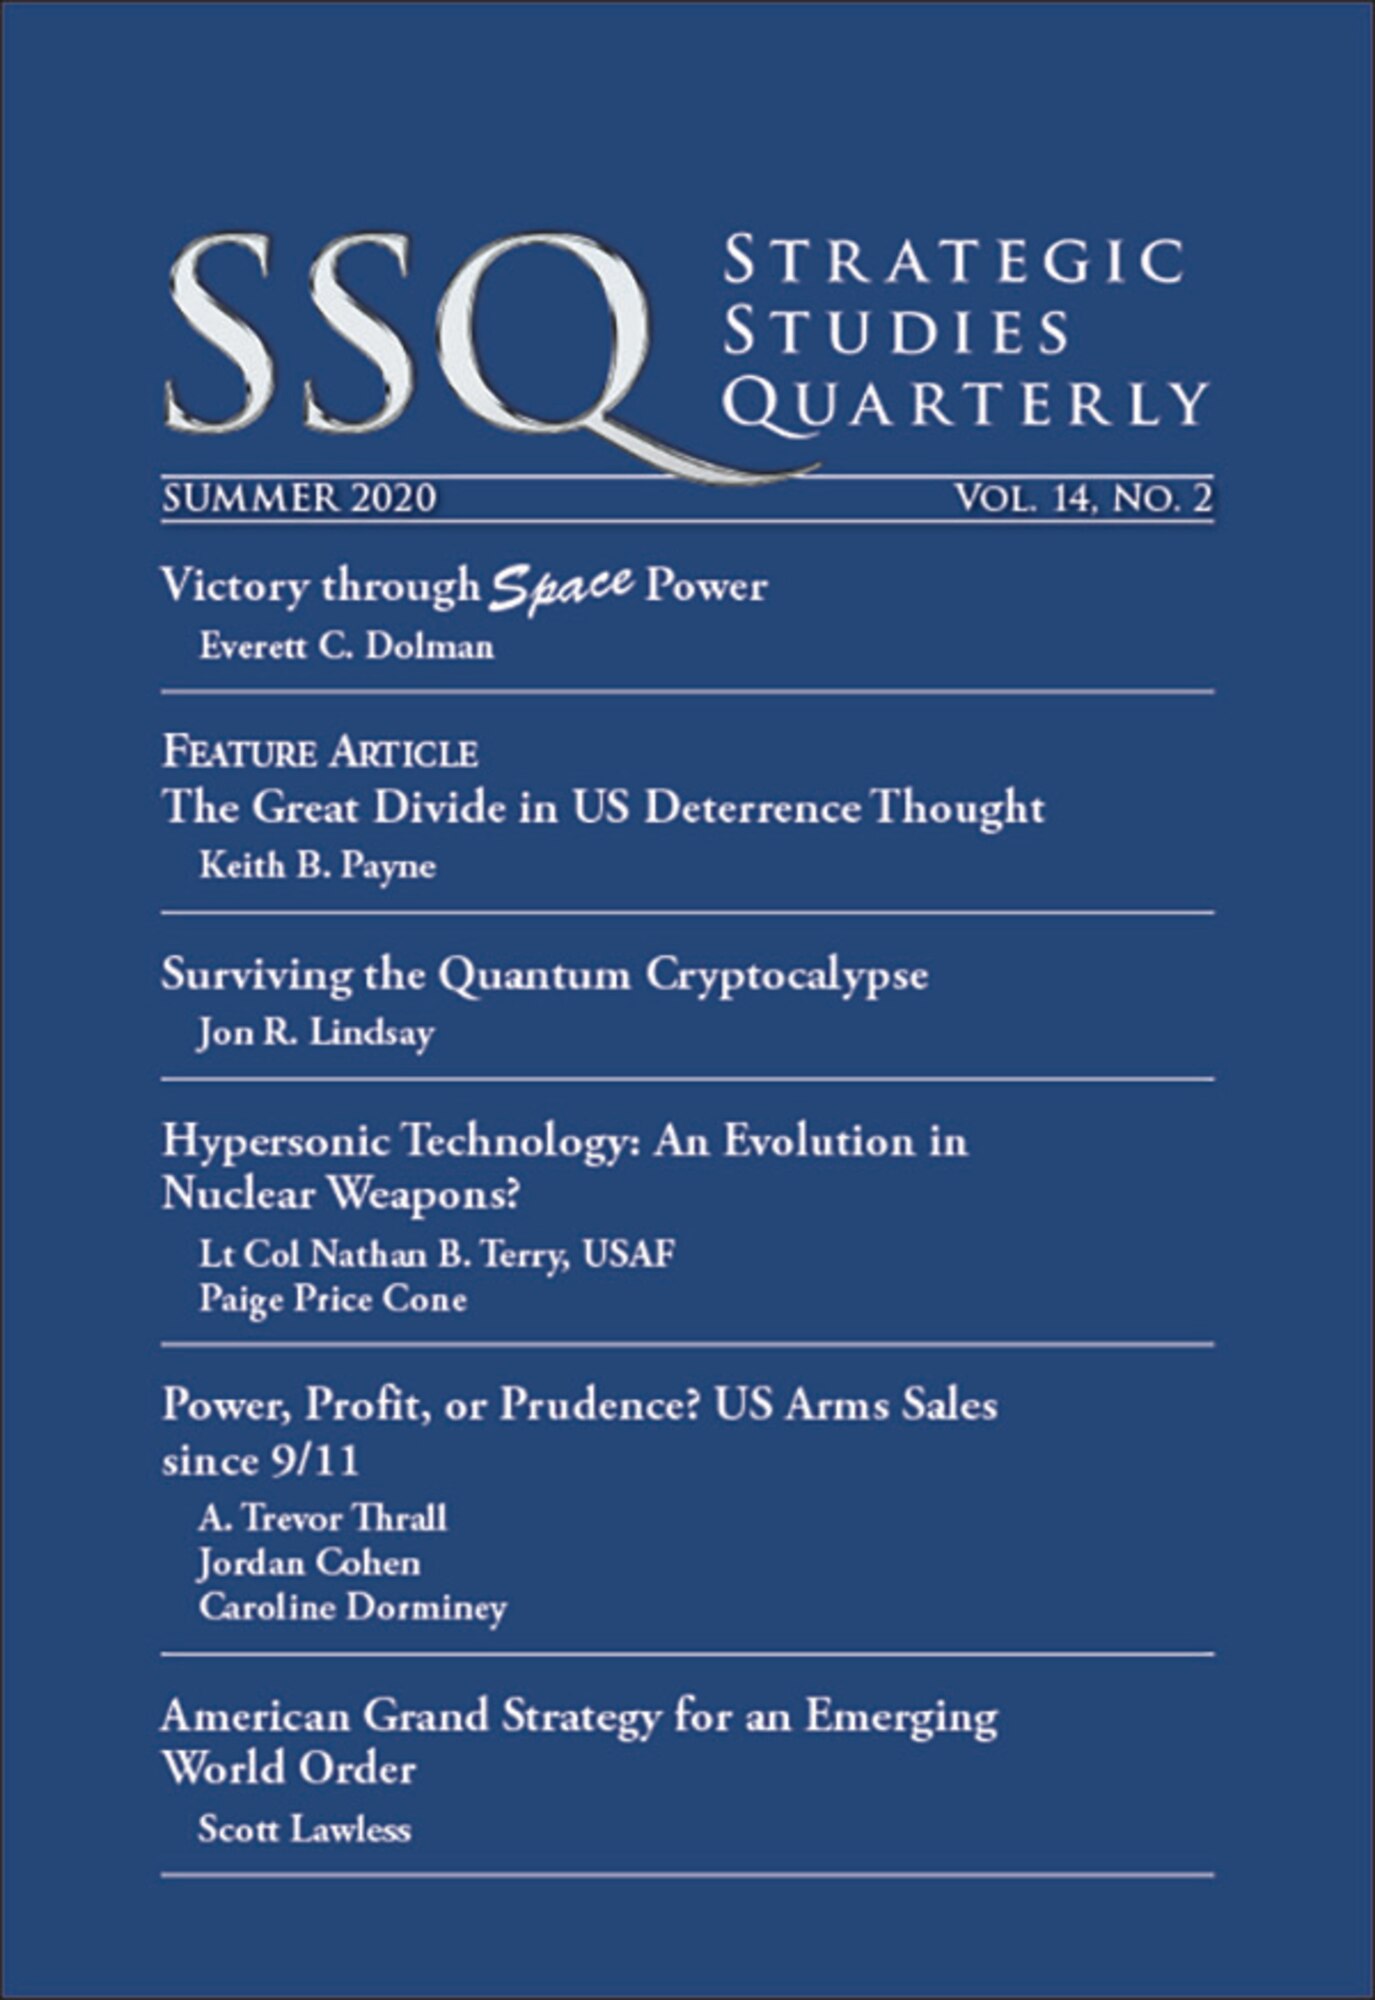 Air University Press releases summer edition of SSQ